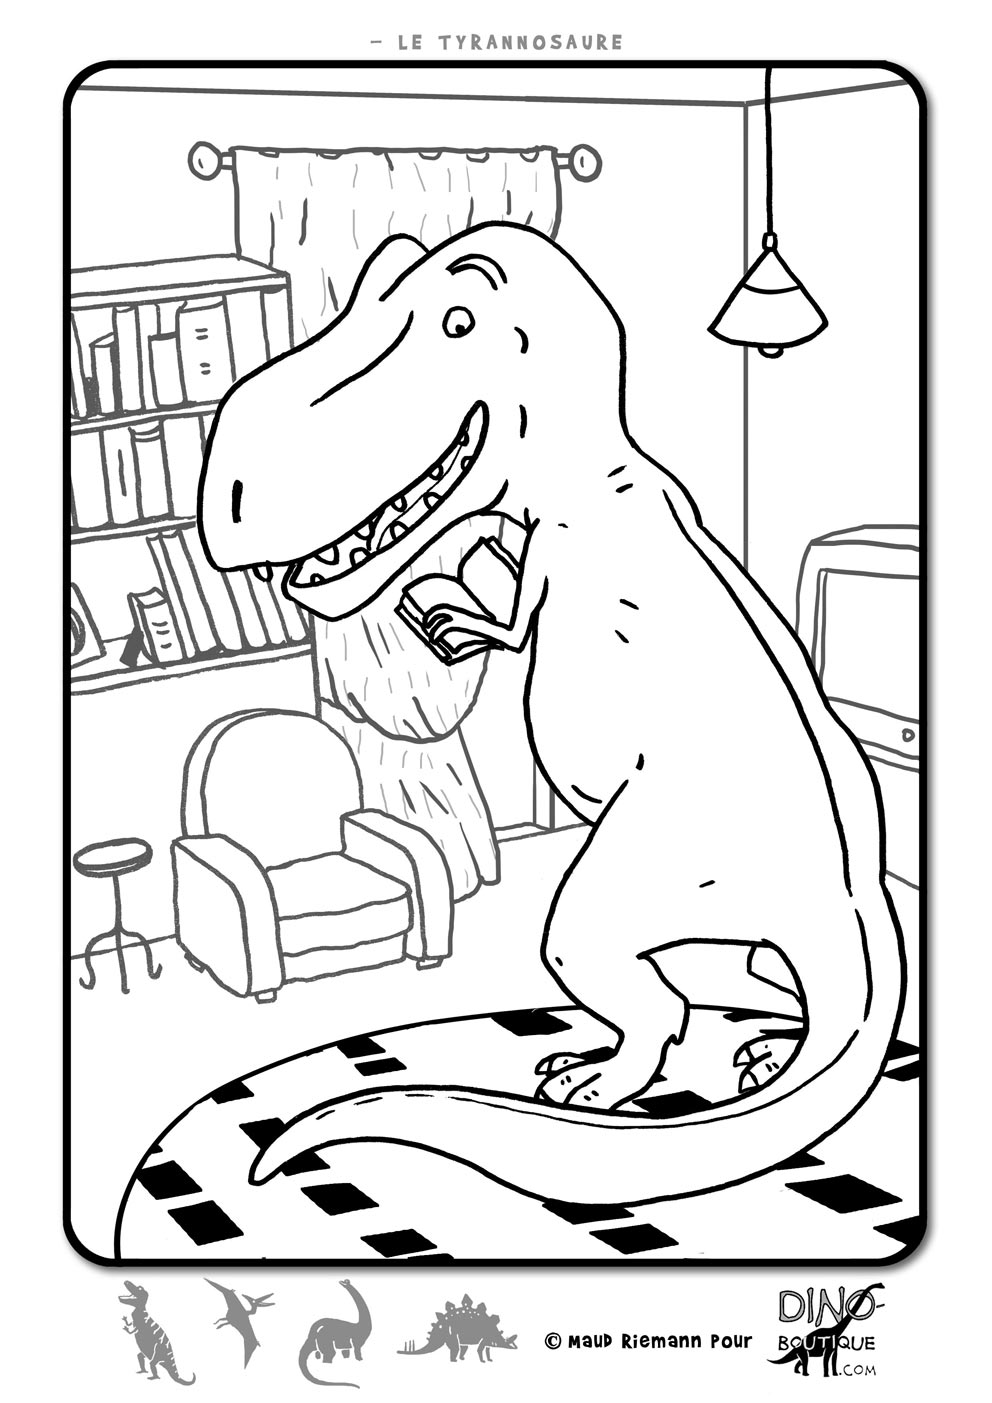 A funny T Rex in a house, to color